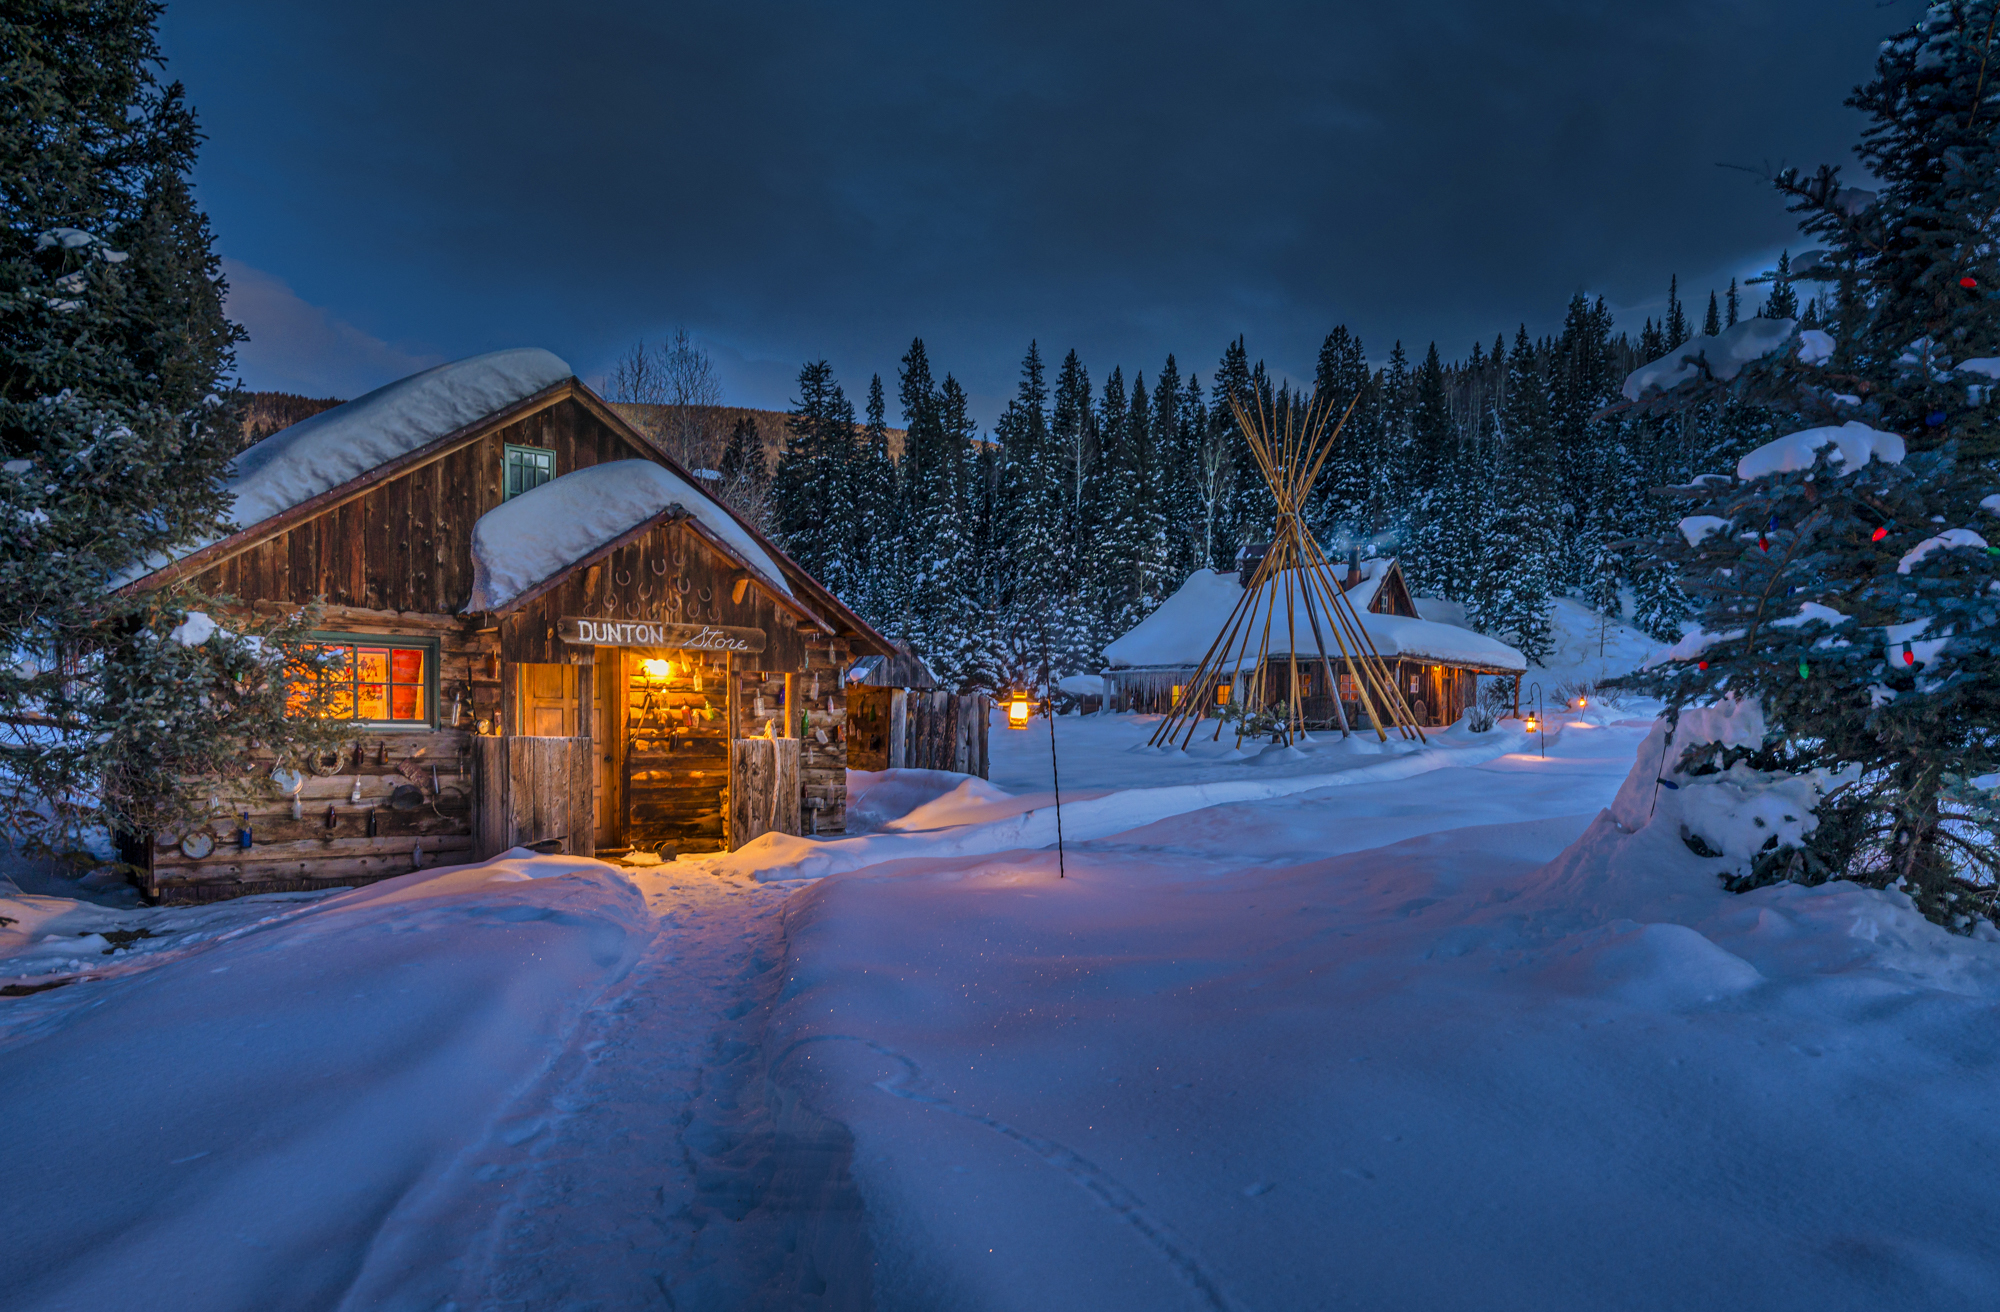 27 Best Winter Getaways and Winter Vacation Ideas in the USA